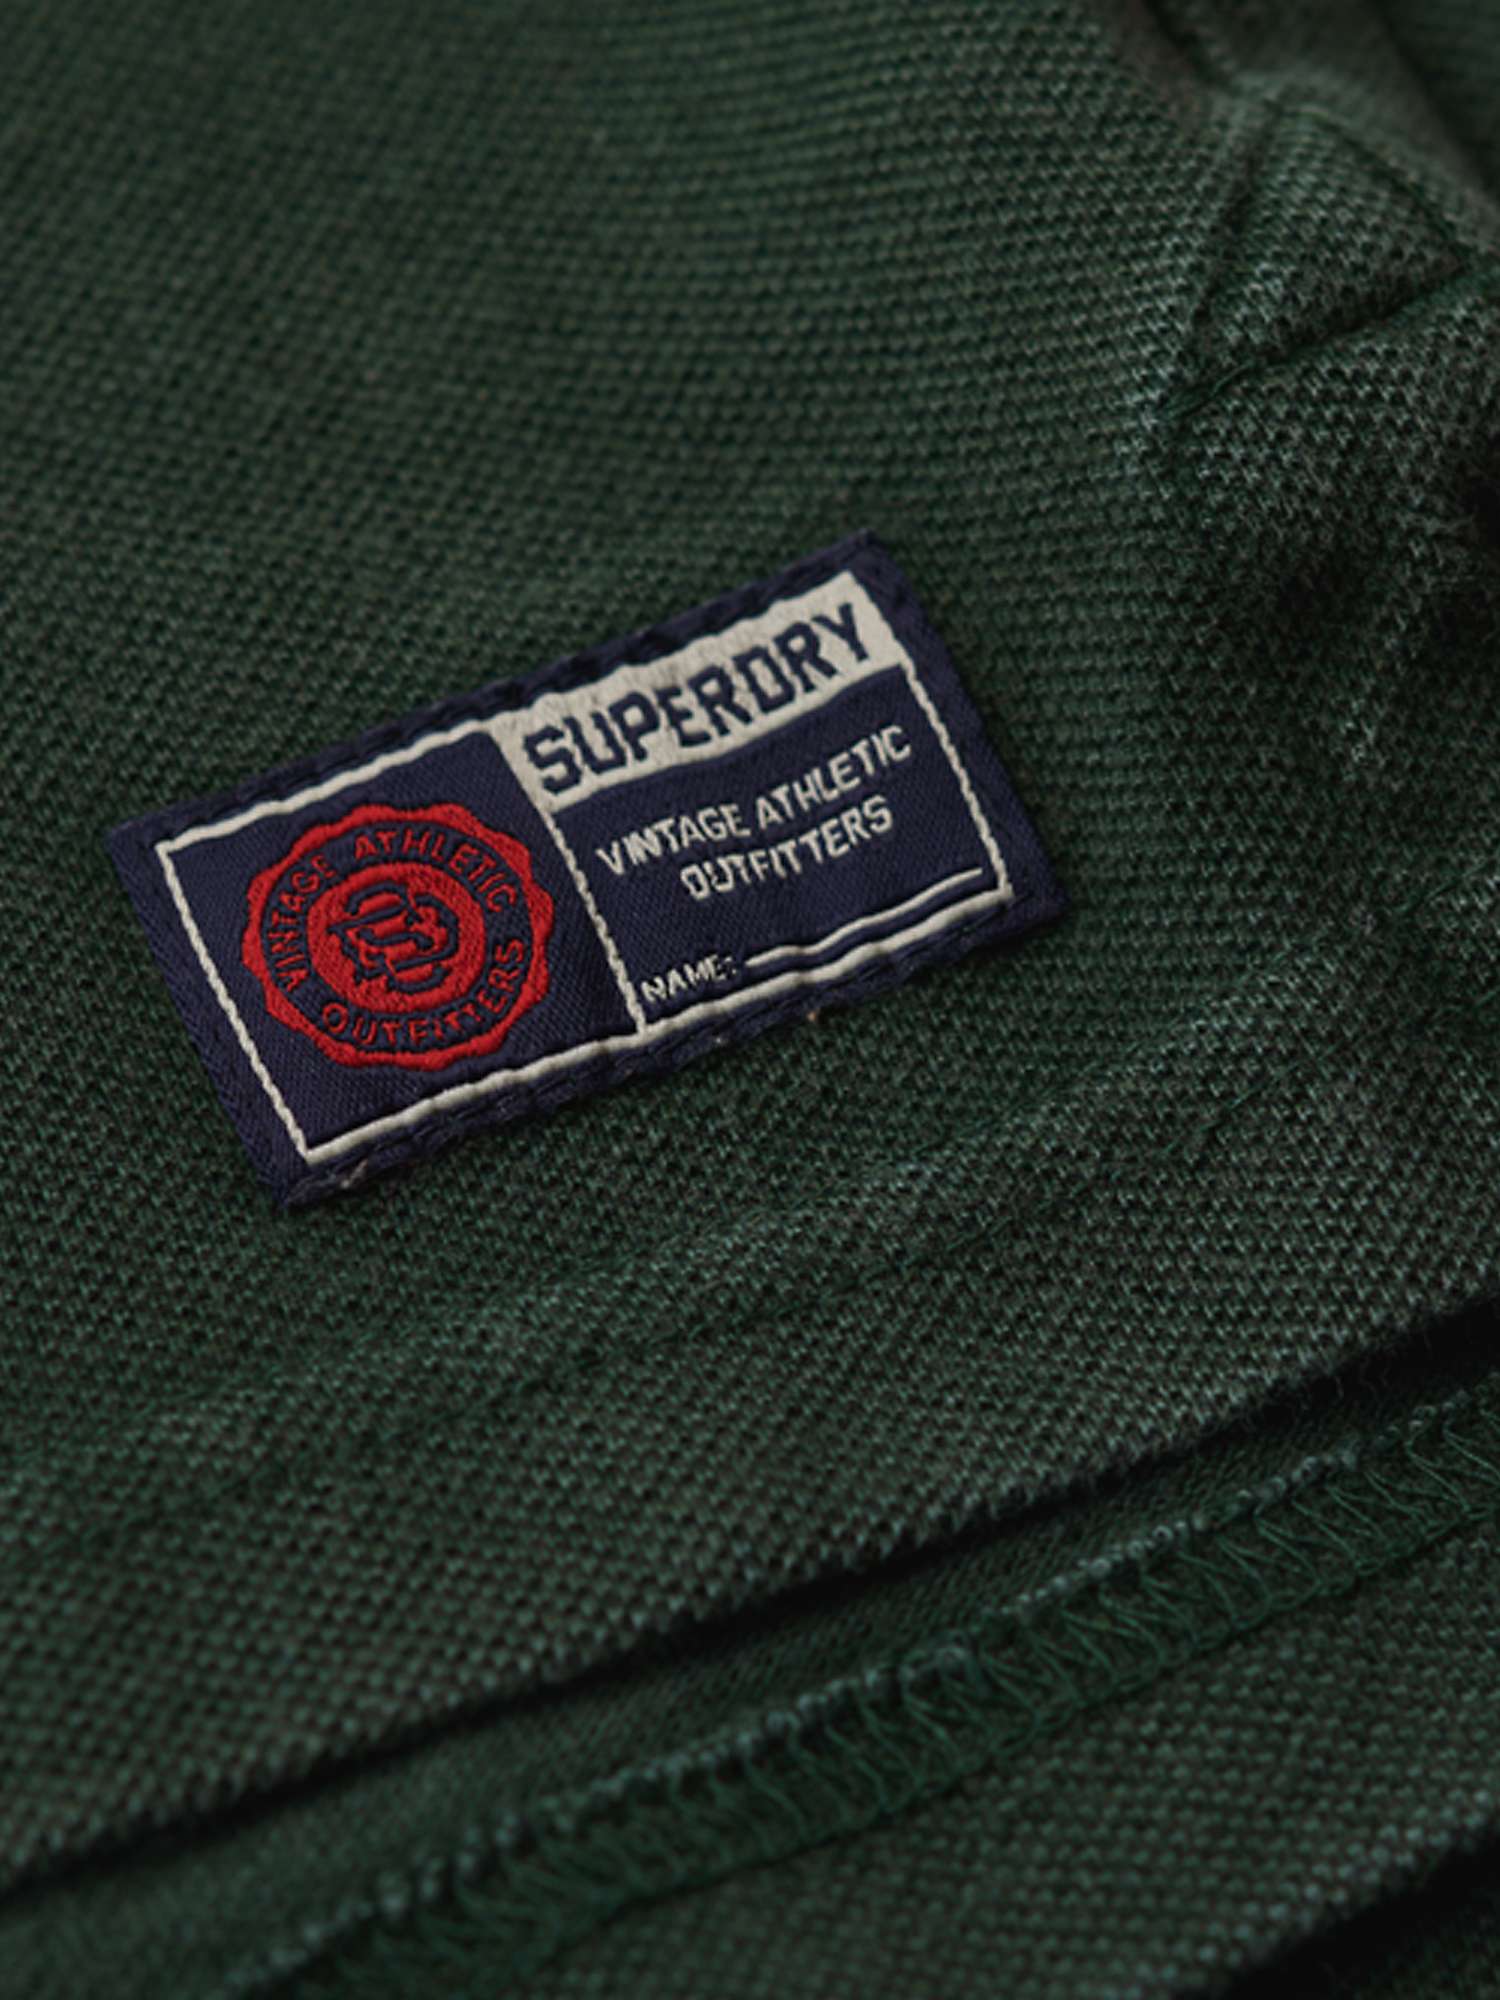 Buy Superdry Vintage Athletic Polo Shirt Online at johnlewis.com